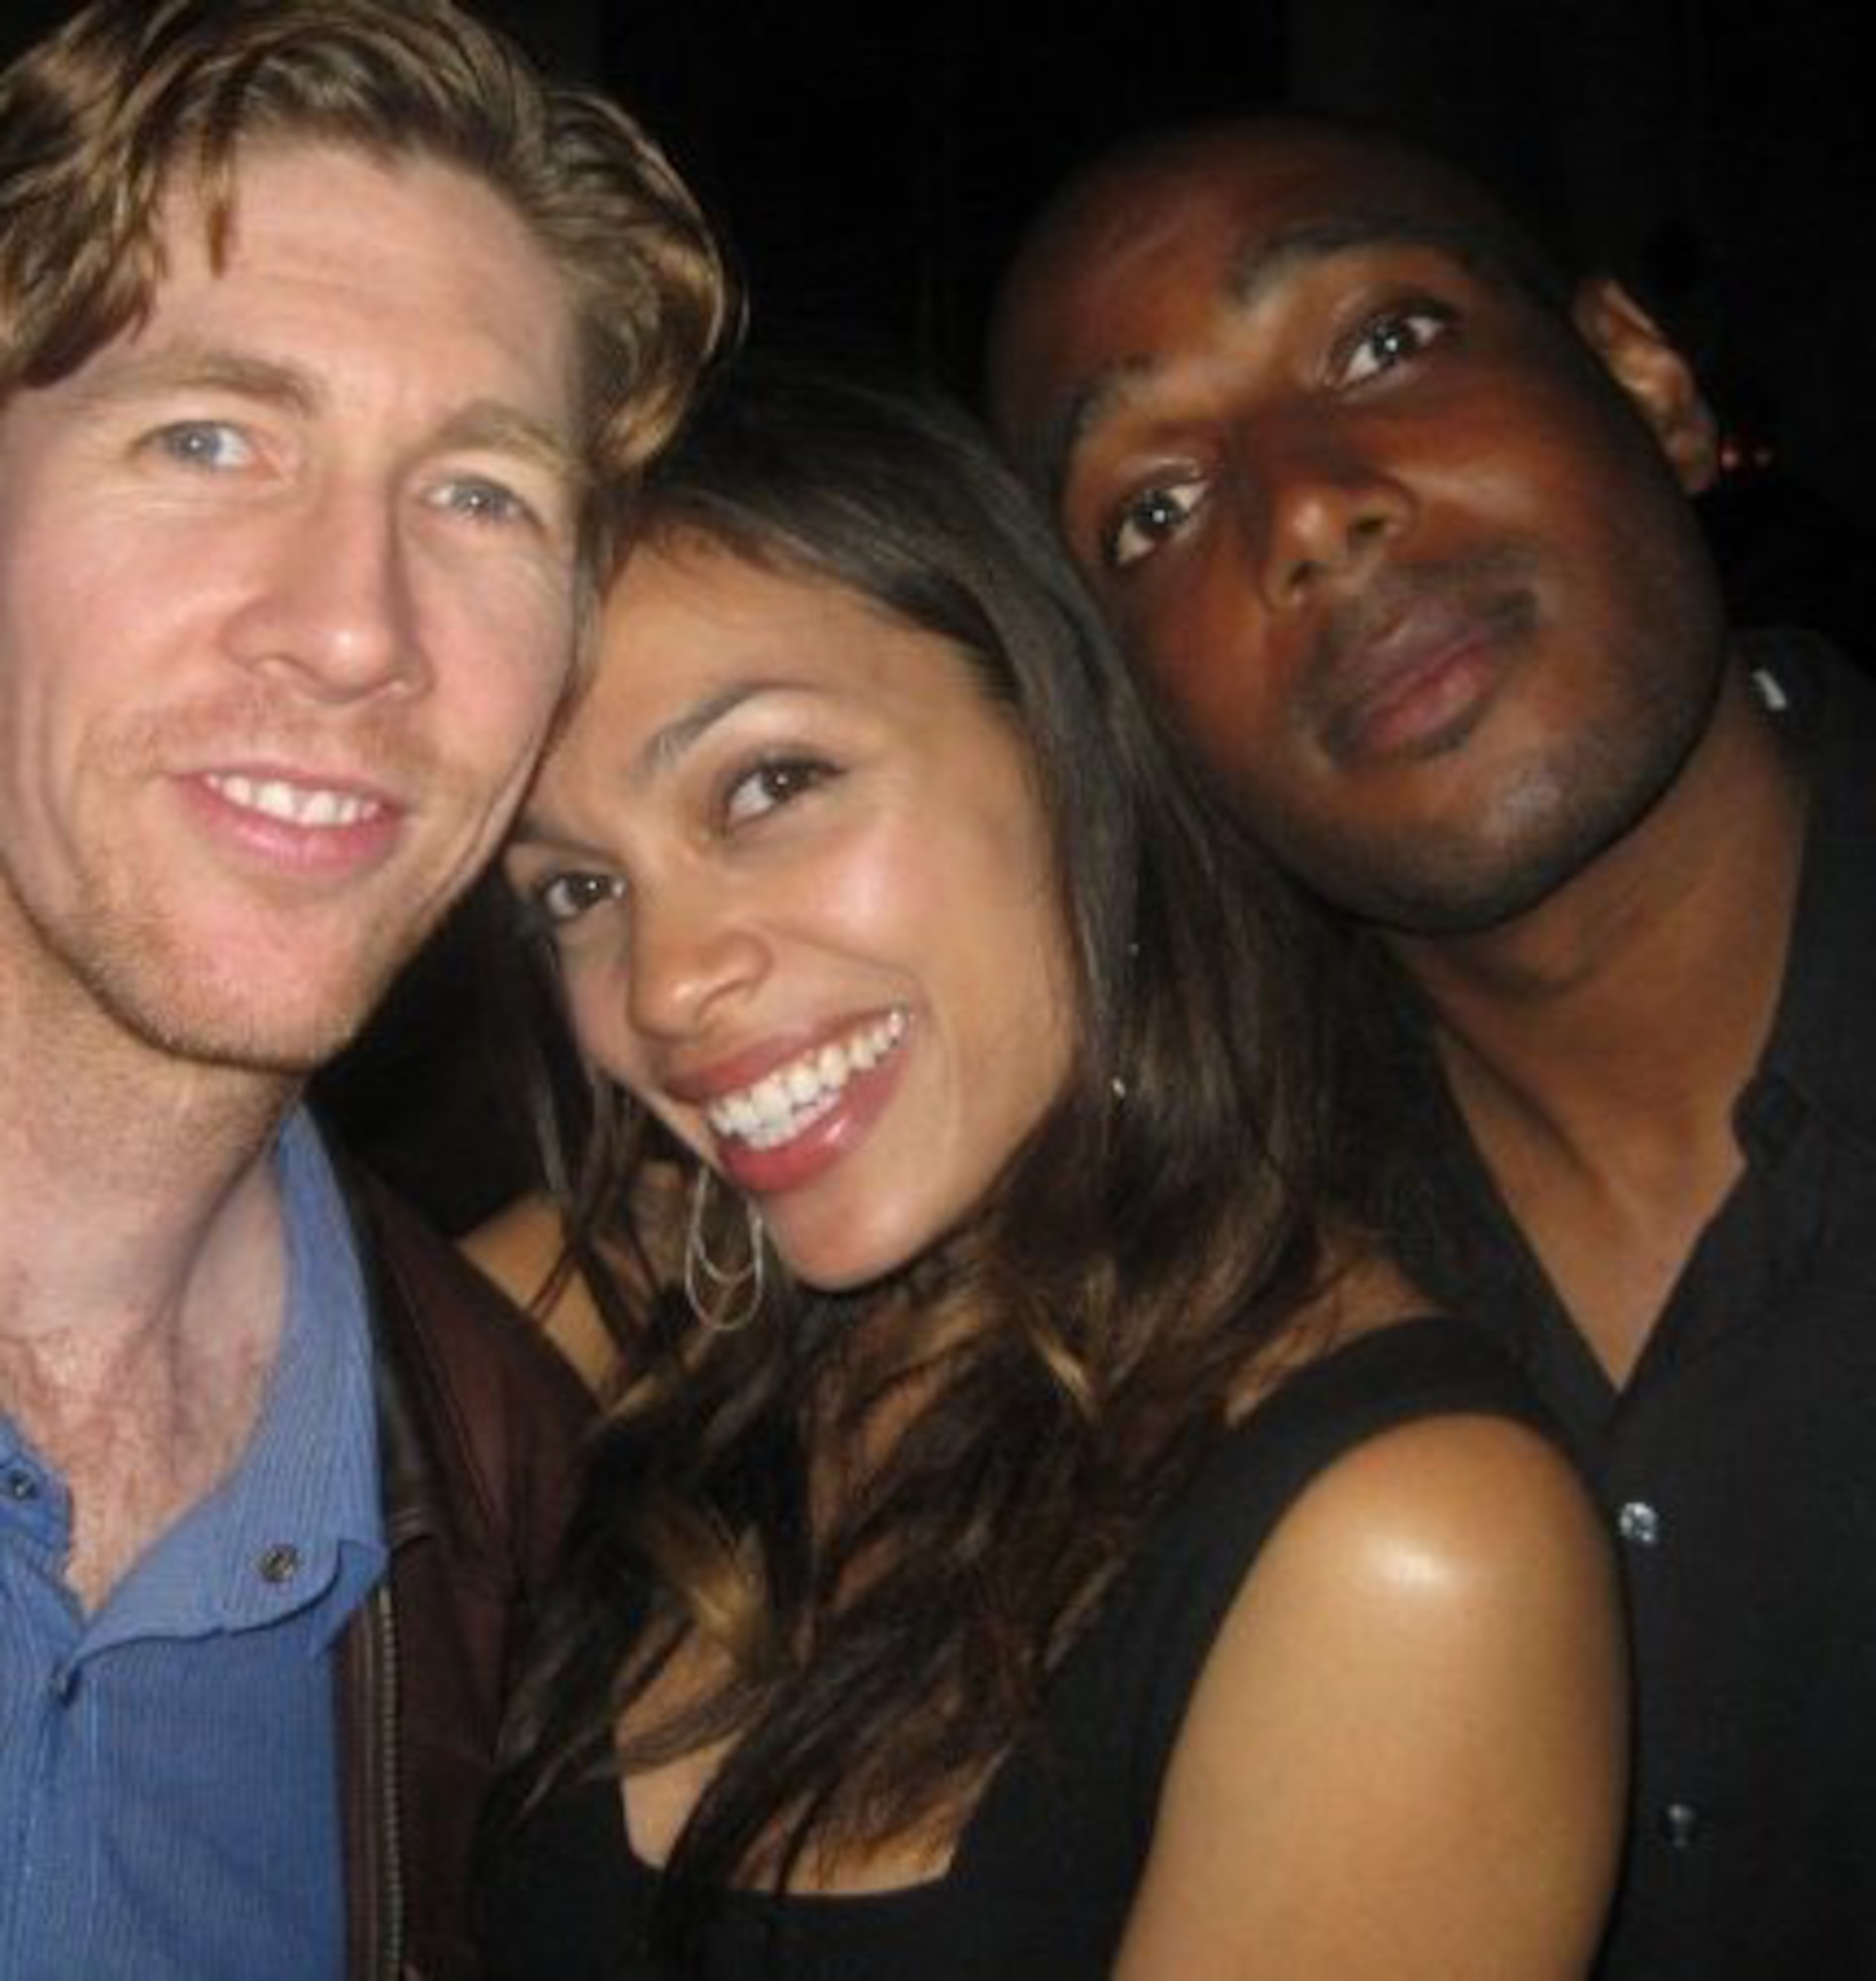 Comic book creator David Atchison (right) with actress and the Occult Crimes Task Force co-creator and actress, Rosario Dawson (center) with director Matt Spradlin. (Photo courtesy of David Atchison)